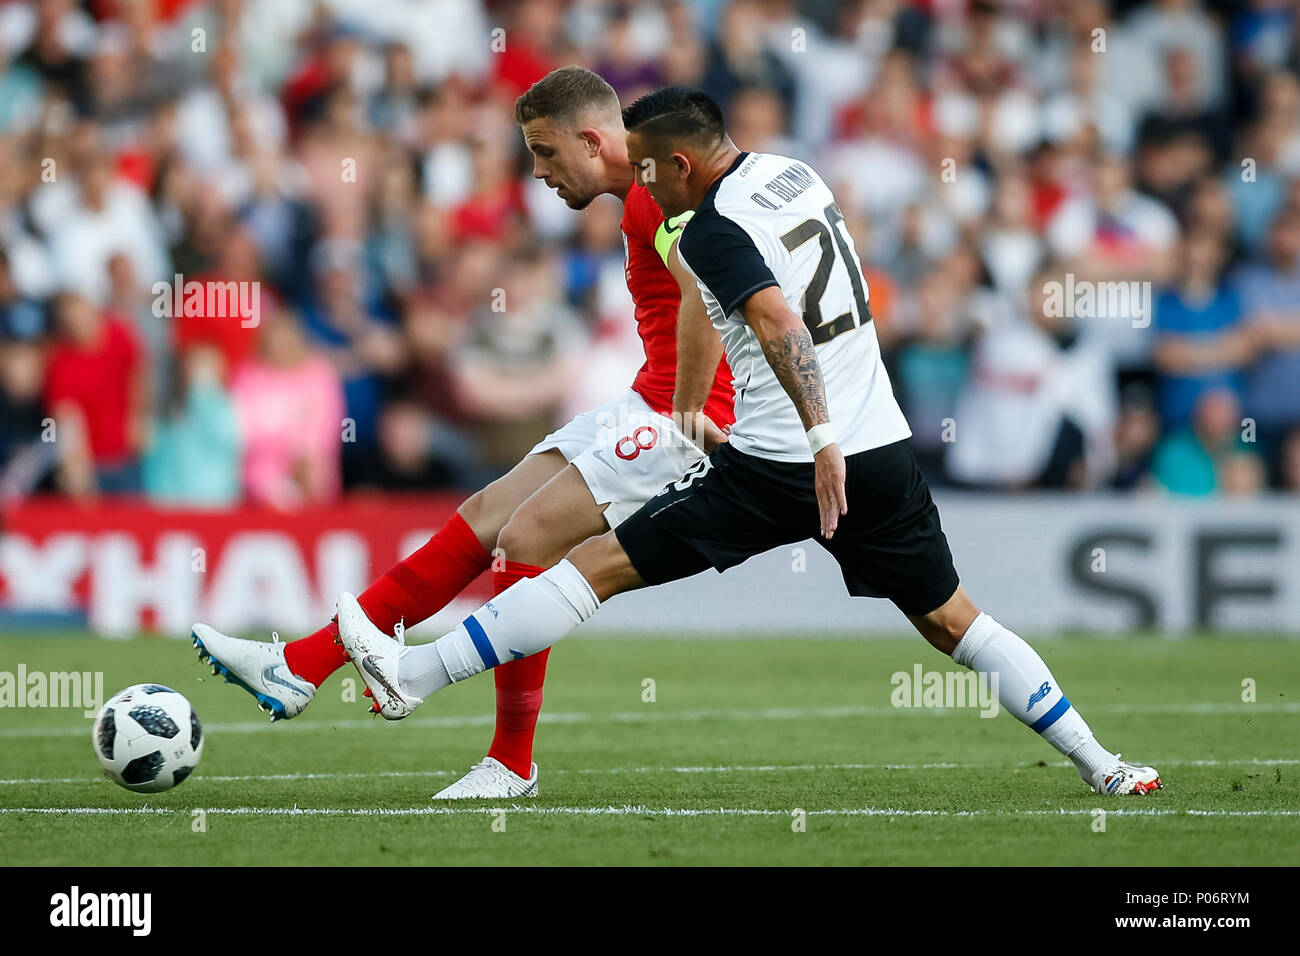 Leeds, UK. 7th Jun, 2018. Jordan Henderson of England and David Guzman of Costa Rica during the International Friendly match between England and Costa Rica at Elland Road on June 7th 2018 in Leeds, England. (Photo by Daniel Chesterton/phcimages.com) Credit: PHC Images/Alamy Live News Stock Photo